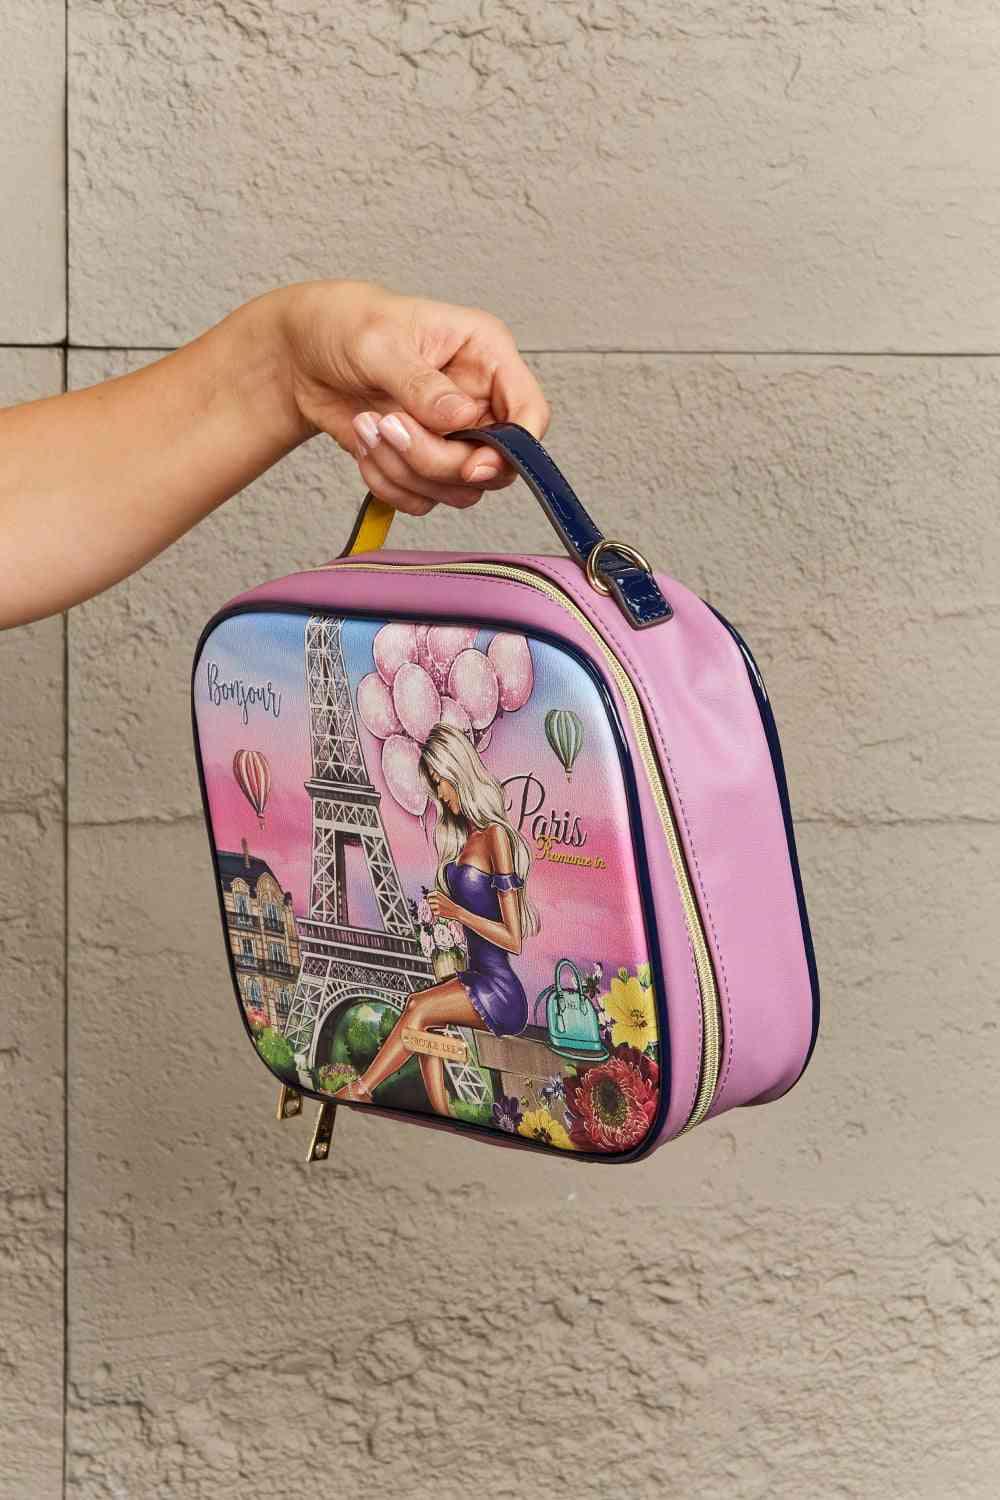 Nicole Lee USA Printed Handbag with Three Pouches - Happily Ever Atchison Shop Co.